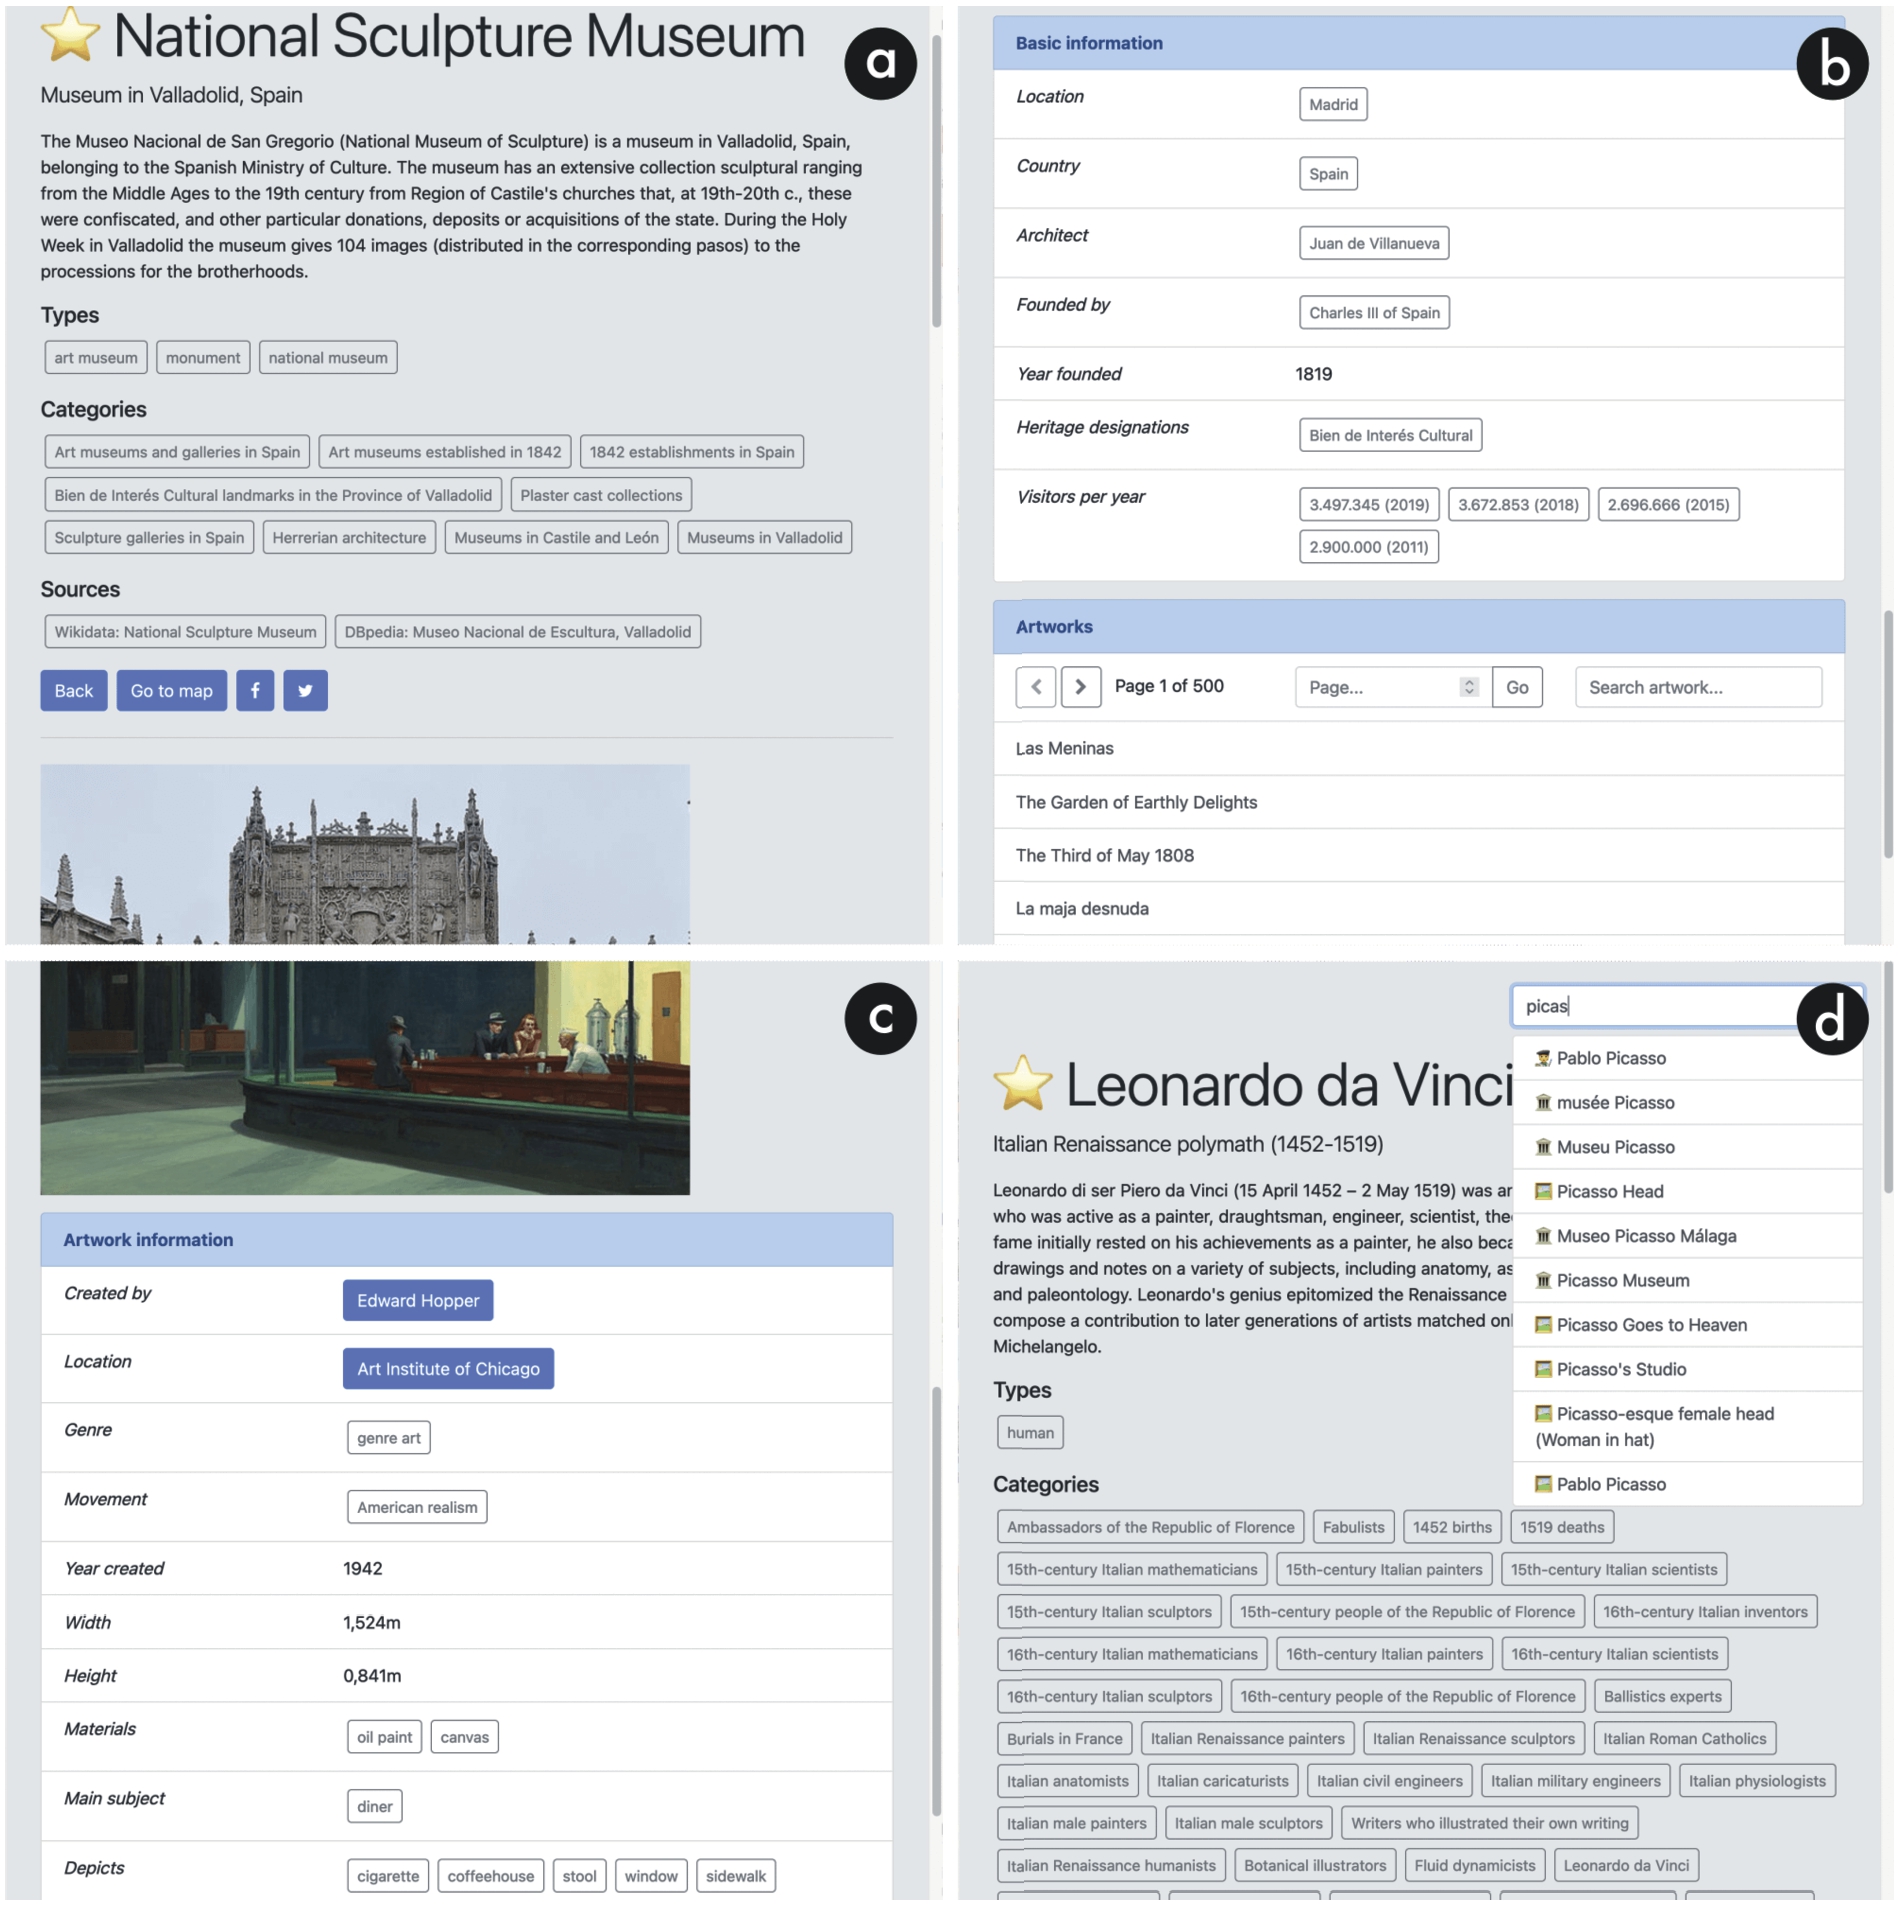 Snapshots of the CH entity interface of LOD4Culture. (a) Extract of the visualization of CH site National Sculpture Museum – route /app/?type=Site&uri=http://www.wikidata.org/entity/Q1581475 – showing label, short description, types and image from Wikidata; and long description and Wikipedia categories from DBpedia; source pages and social media buttons are also included. (b) Extract of the visualization of CH site Museo del Prado – route /app/type=Site&uri=http://www.wikidata.org/entity/Q160112 – showing basic information, e.g. country, and a browsable list of the 5K artworks retrieved from Wikidata; clicking on an artwork will lead to a new CH entity in LOD4Culture, e.g. painting ‘Las Meninas’. (c) Extract of the visualization of artwork ‘Nighthawks’ – route /app/?type=Artwork&uri=http://www.wikidata.org/entity/Q83872 – showing an image and a list of factual information; blue buttons link to other CH entities in LOD4Culture, e.g. artist Edward Hopper; gray buttons display modal windows with the corresponding source Wikidata or DBpedia pages. (d) Extract of the visualization of artist Leonardo da Vinci – route /app/?type=Artist&uri=http://www.wikidata.org/entity/Q762 – showing label, short and long descriptions, types, and Wikipedia categories; the search textbox shows a list of suggestions for picas.